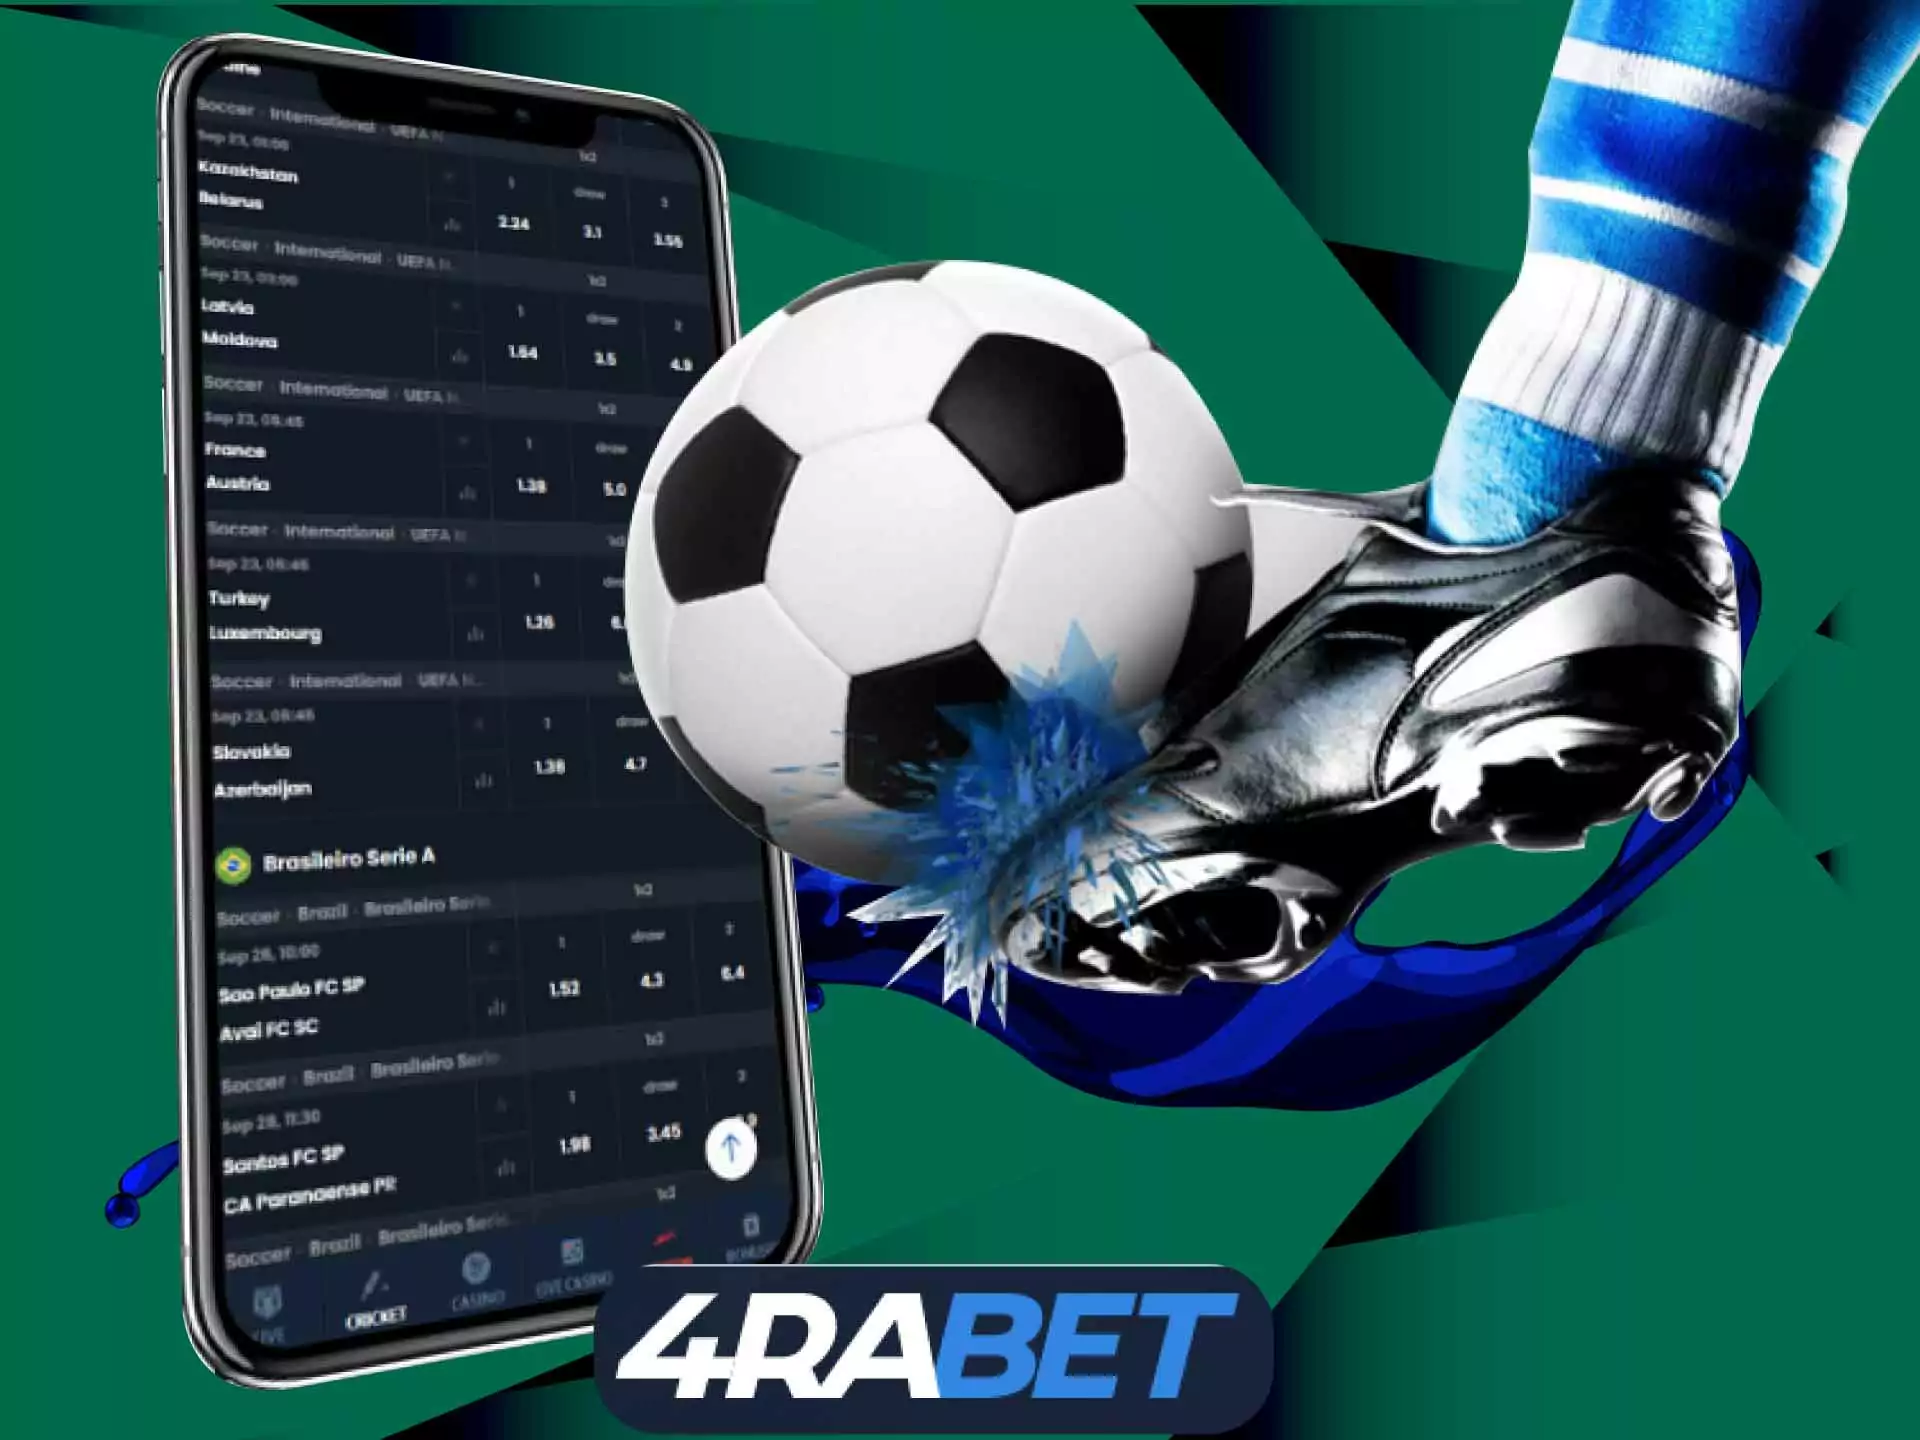 Place a bet on the winner of the match in the 4rabet app.